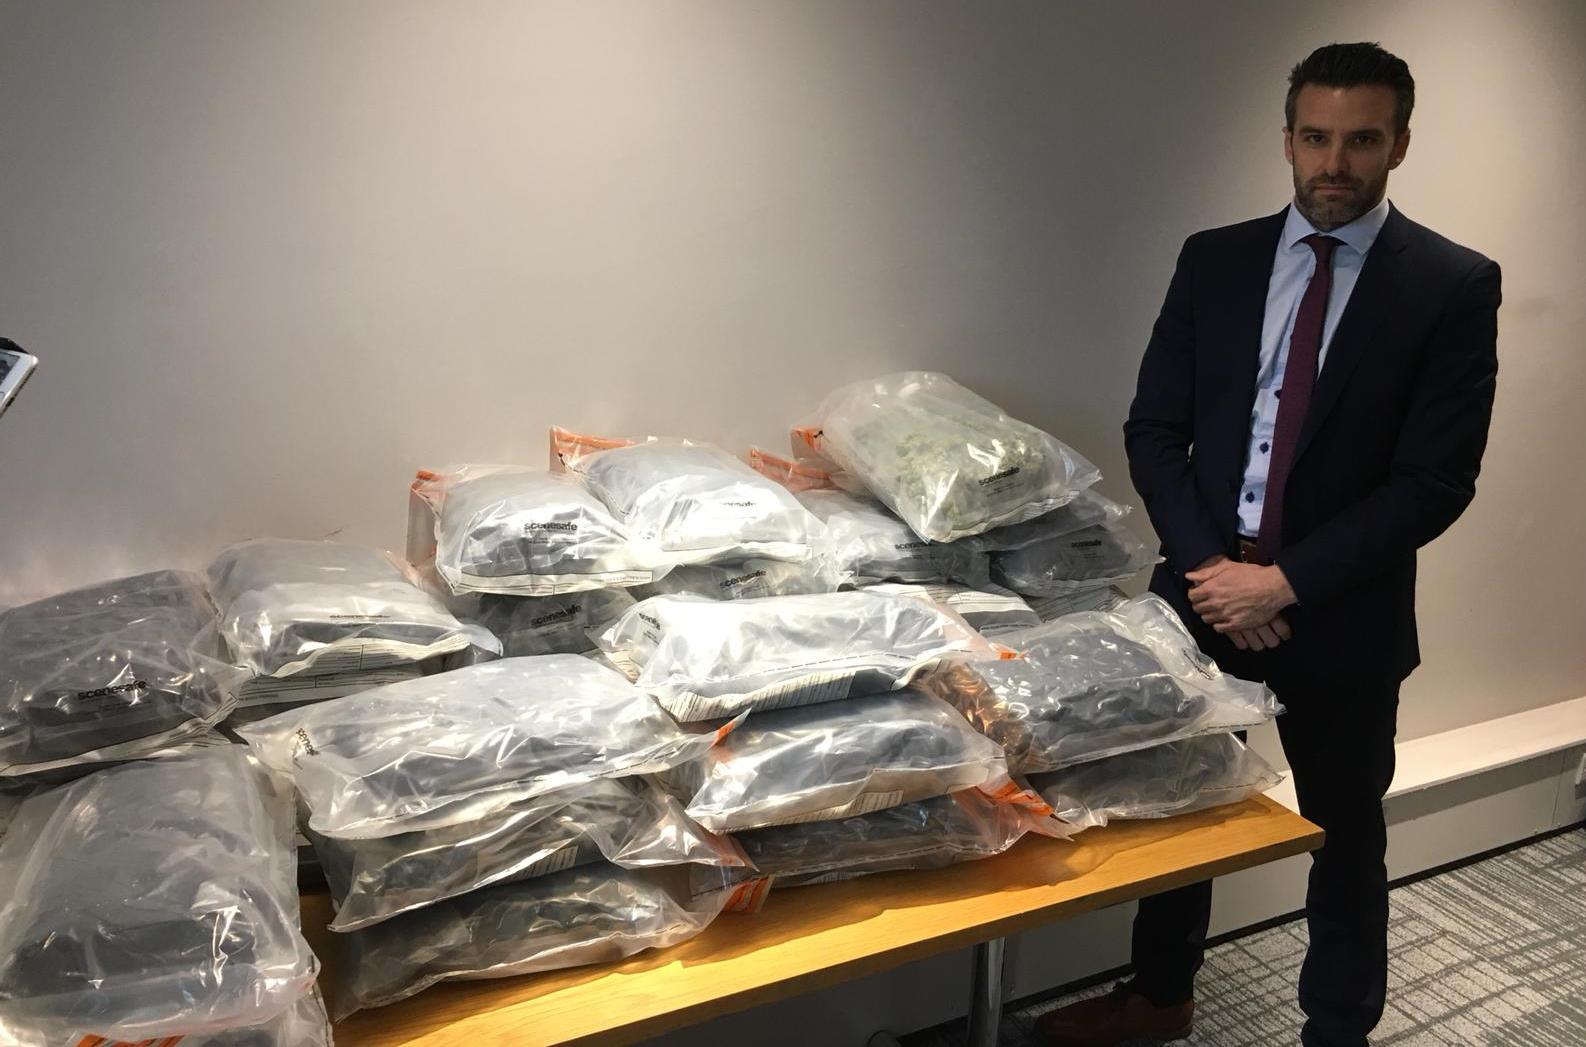 Detective Superintendent Bobby Singleton with approximately 50kg of herbal cannabis with an estimated street value of just under £1million